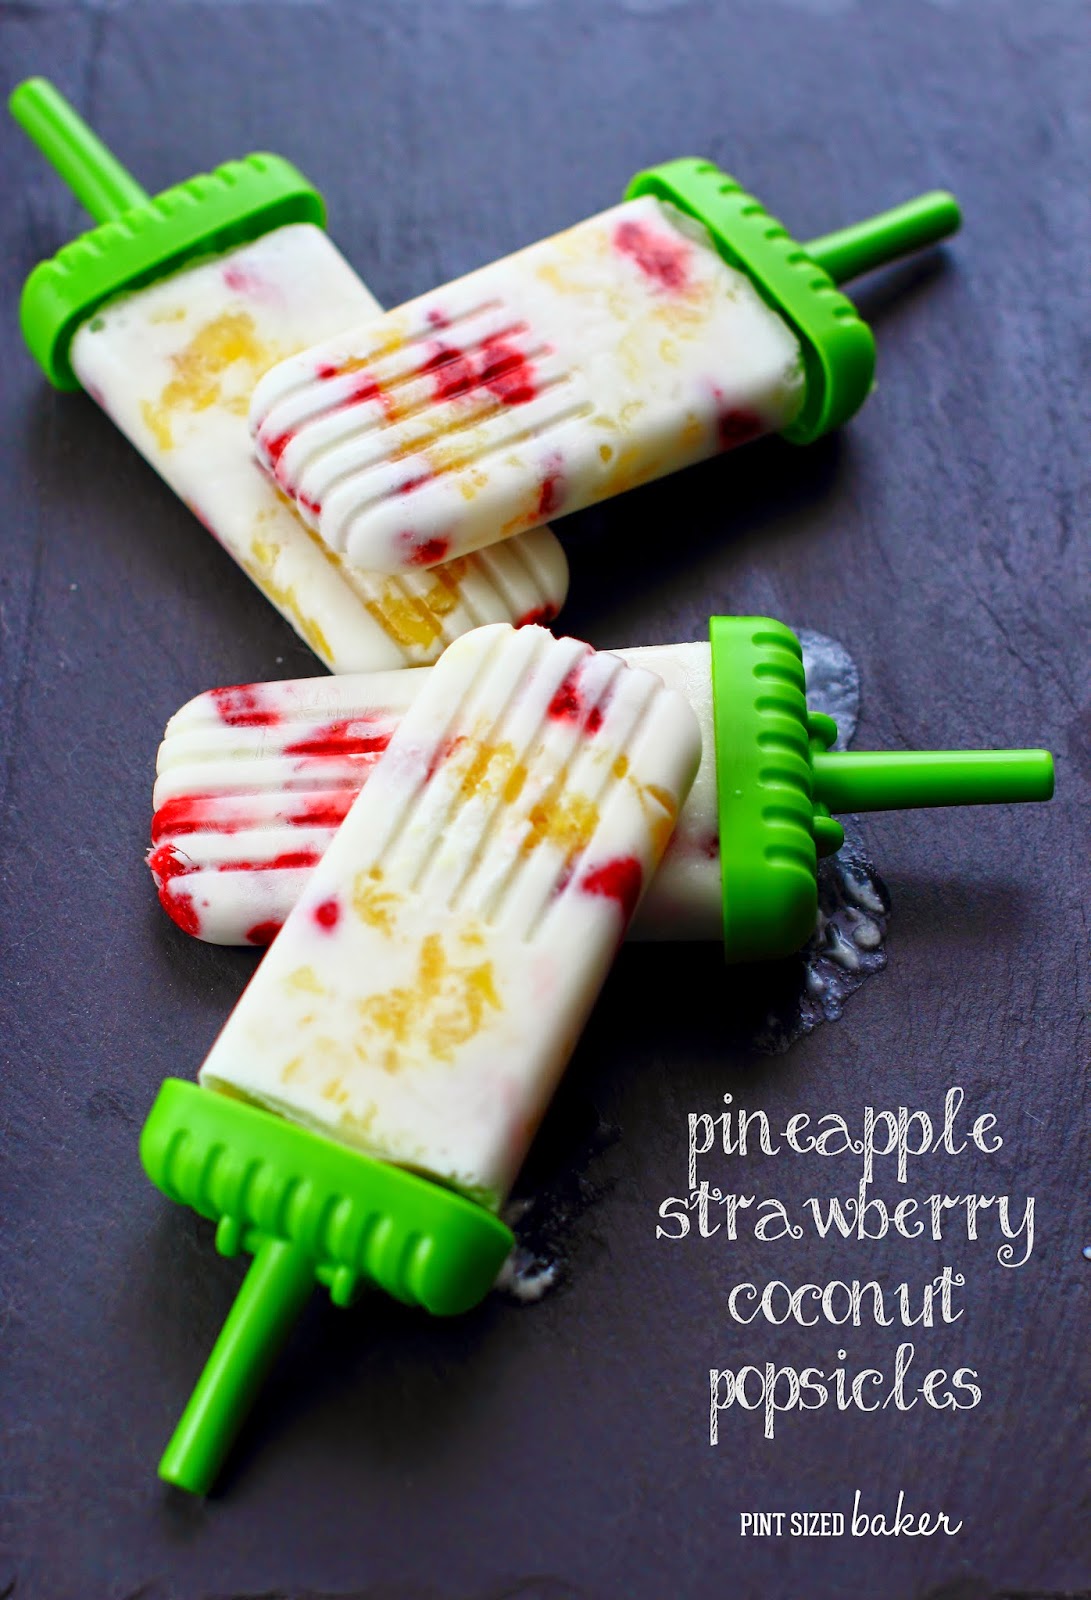 Kids young and old can make and enjoy these Pineapple Strawberry Coconut Popsicles Real, simple ingredients that are dairy free and naturally gluten free. Fresh fruit and coconut milk makes these frozen desserts a welcome snack!